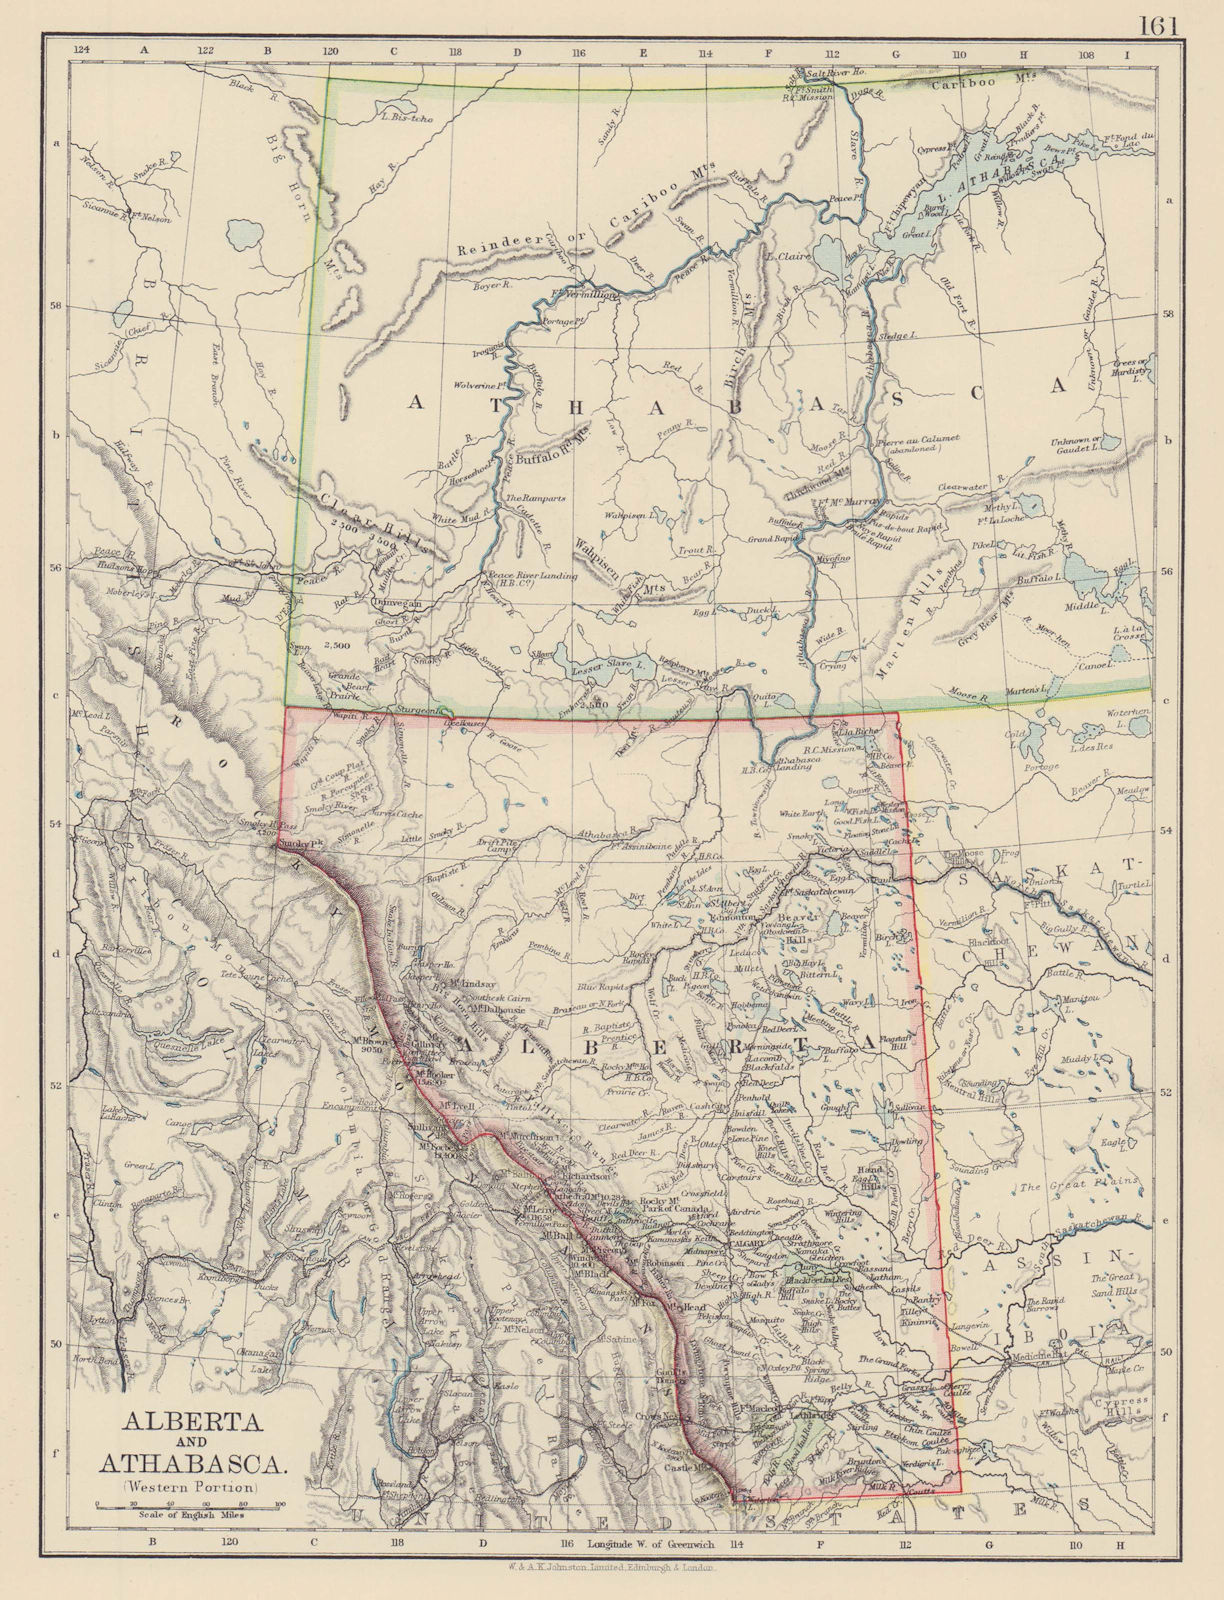 ATHABASCA & ALBERTA Province map w/ Canadian Pacific Railroad. JOHNSTON 1901